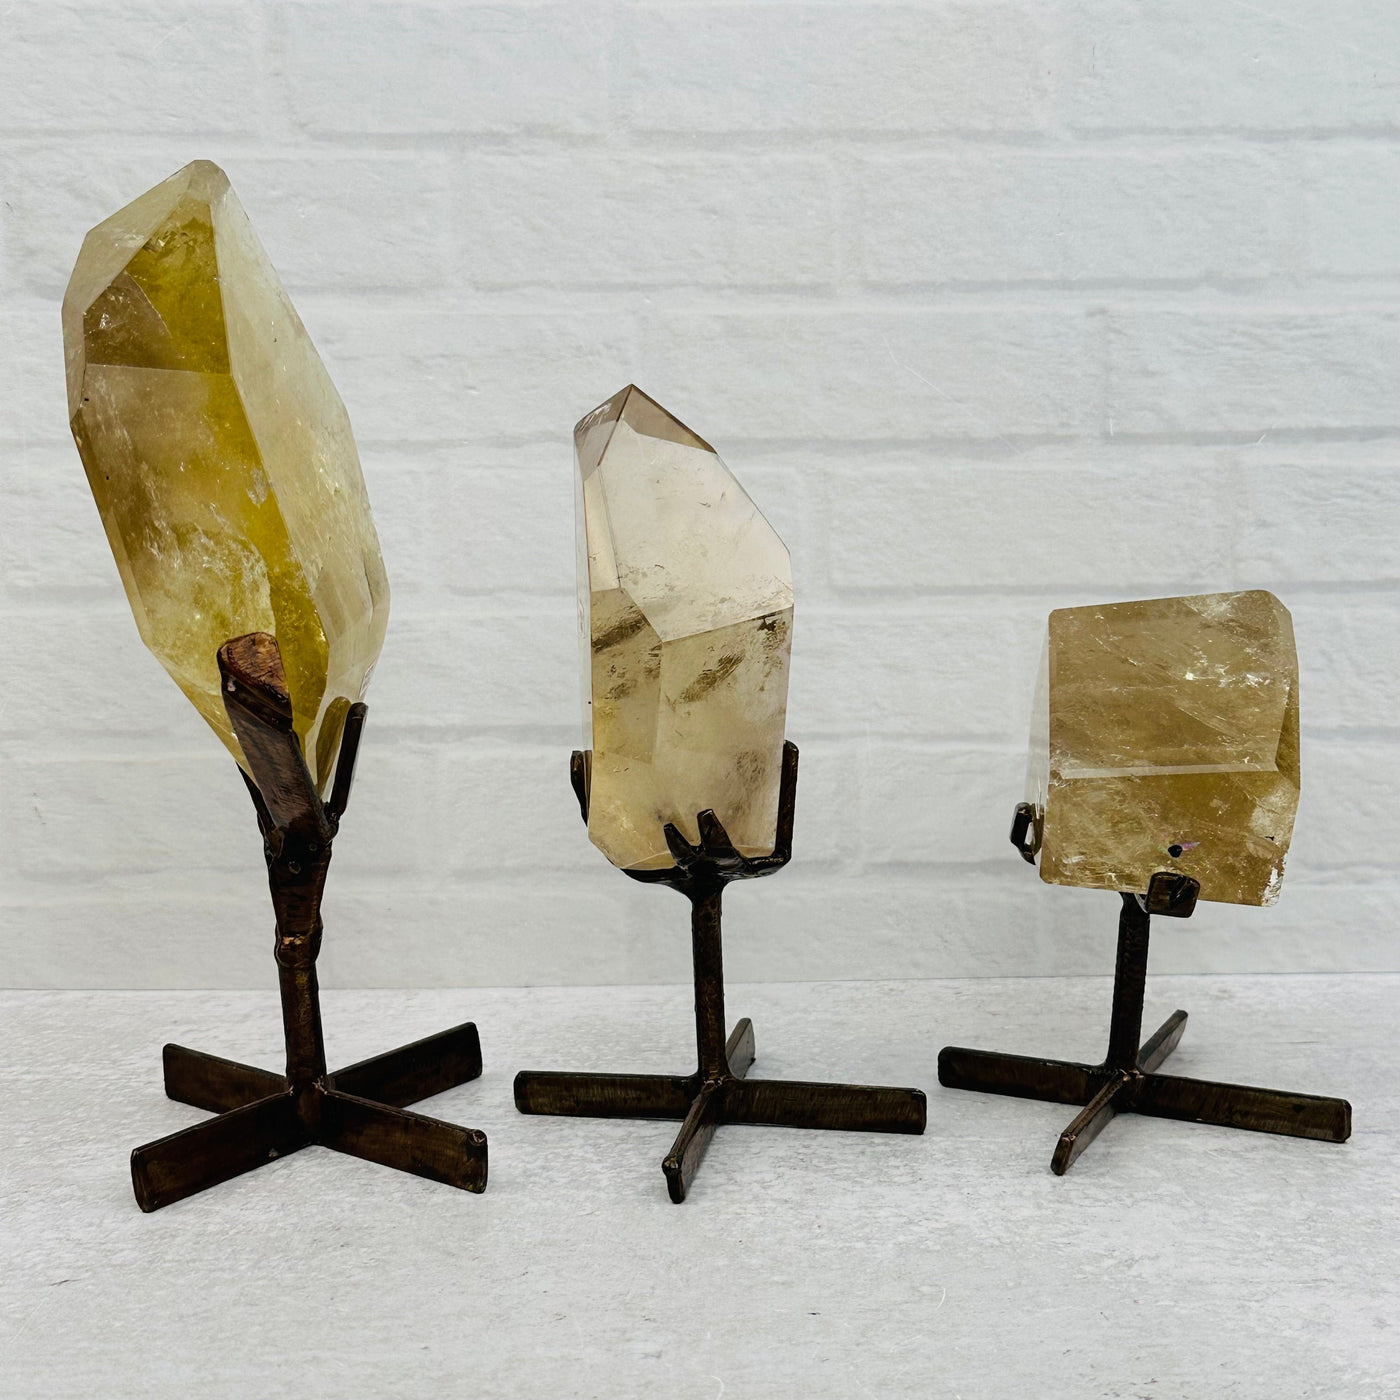 Natural Citrine Crystal on Metal Stand - You Choose - Collectors Piece